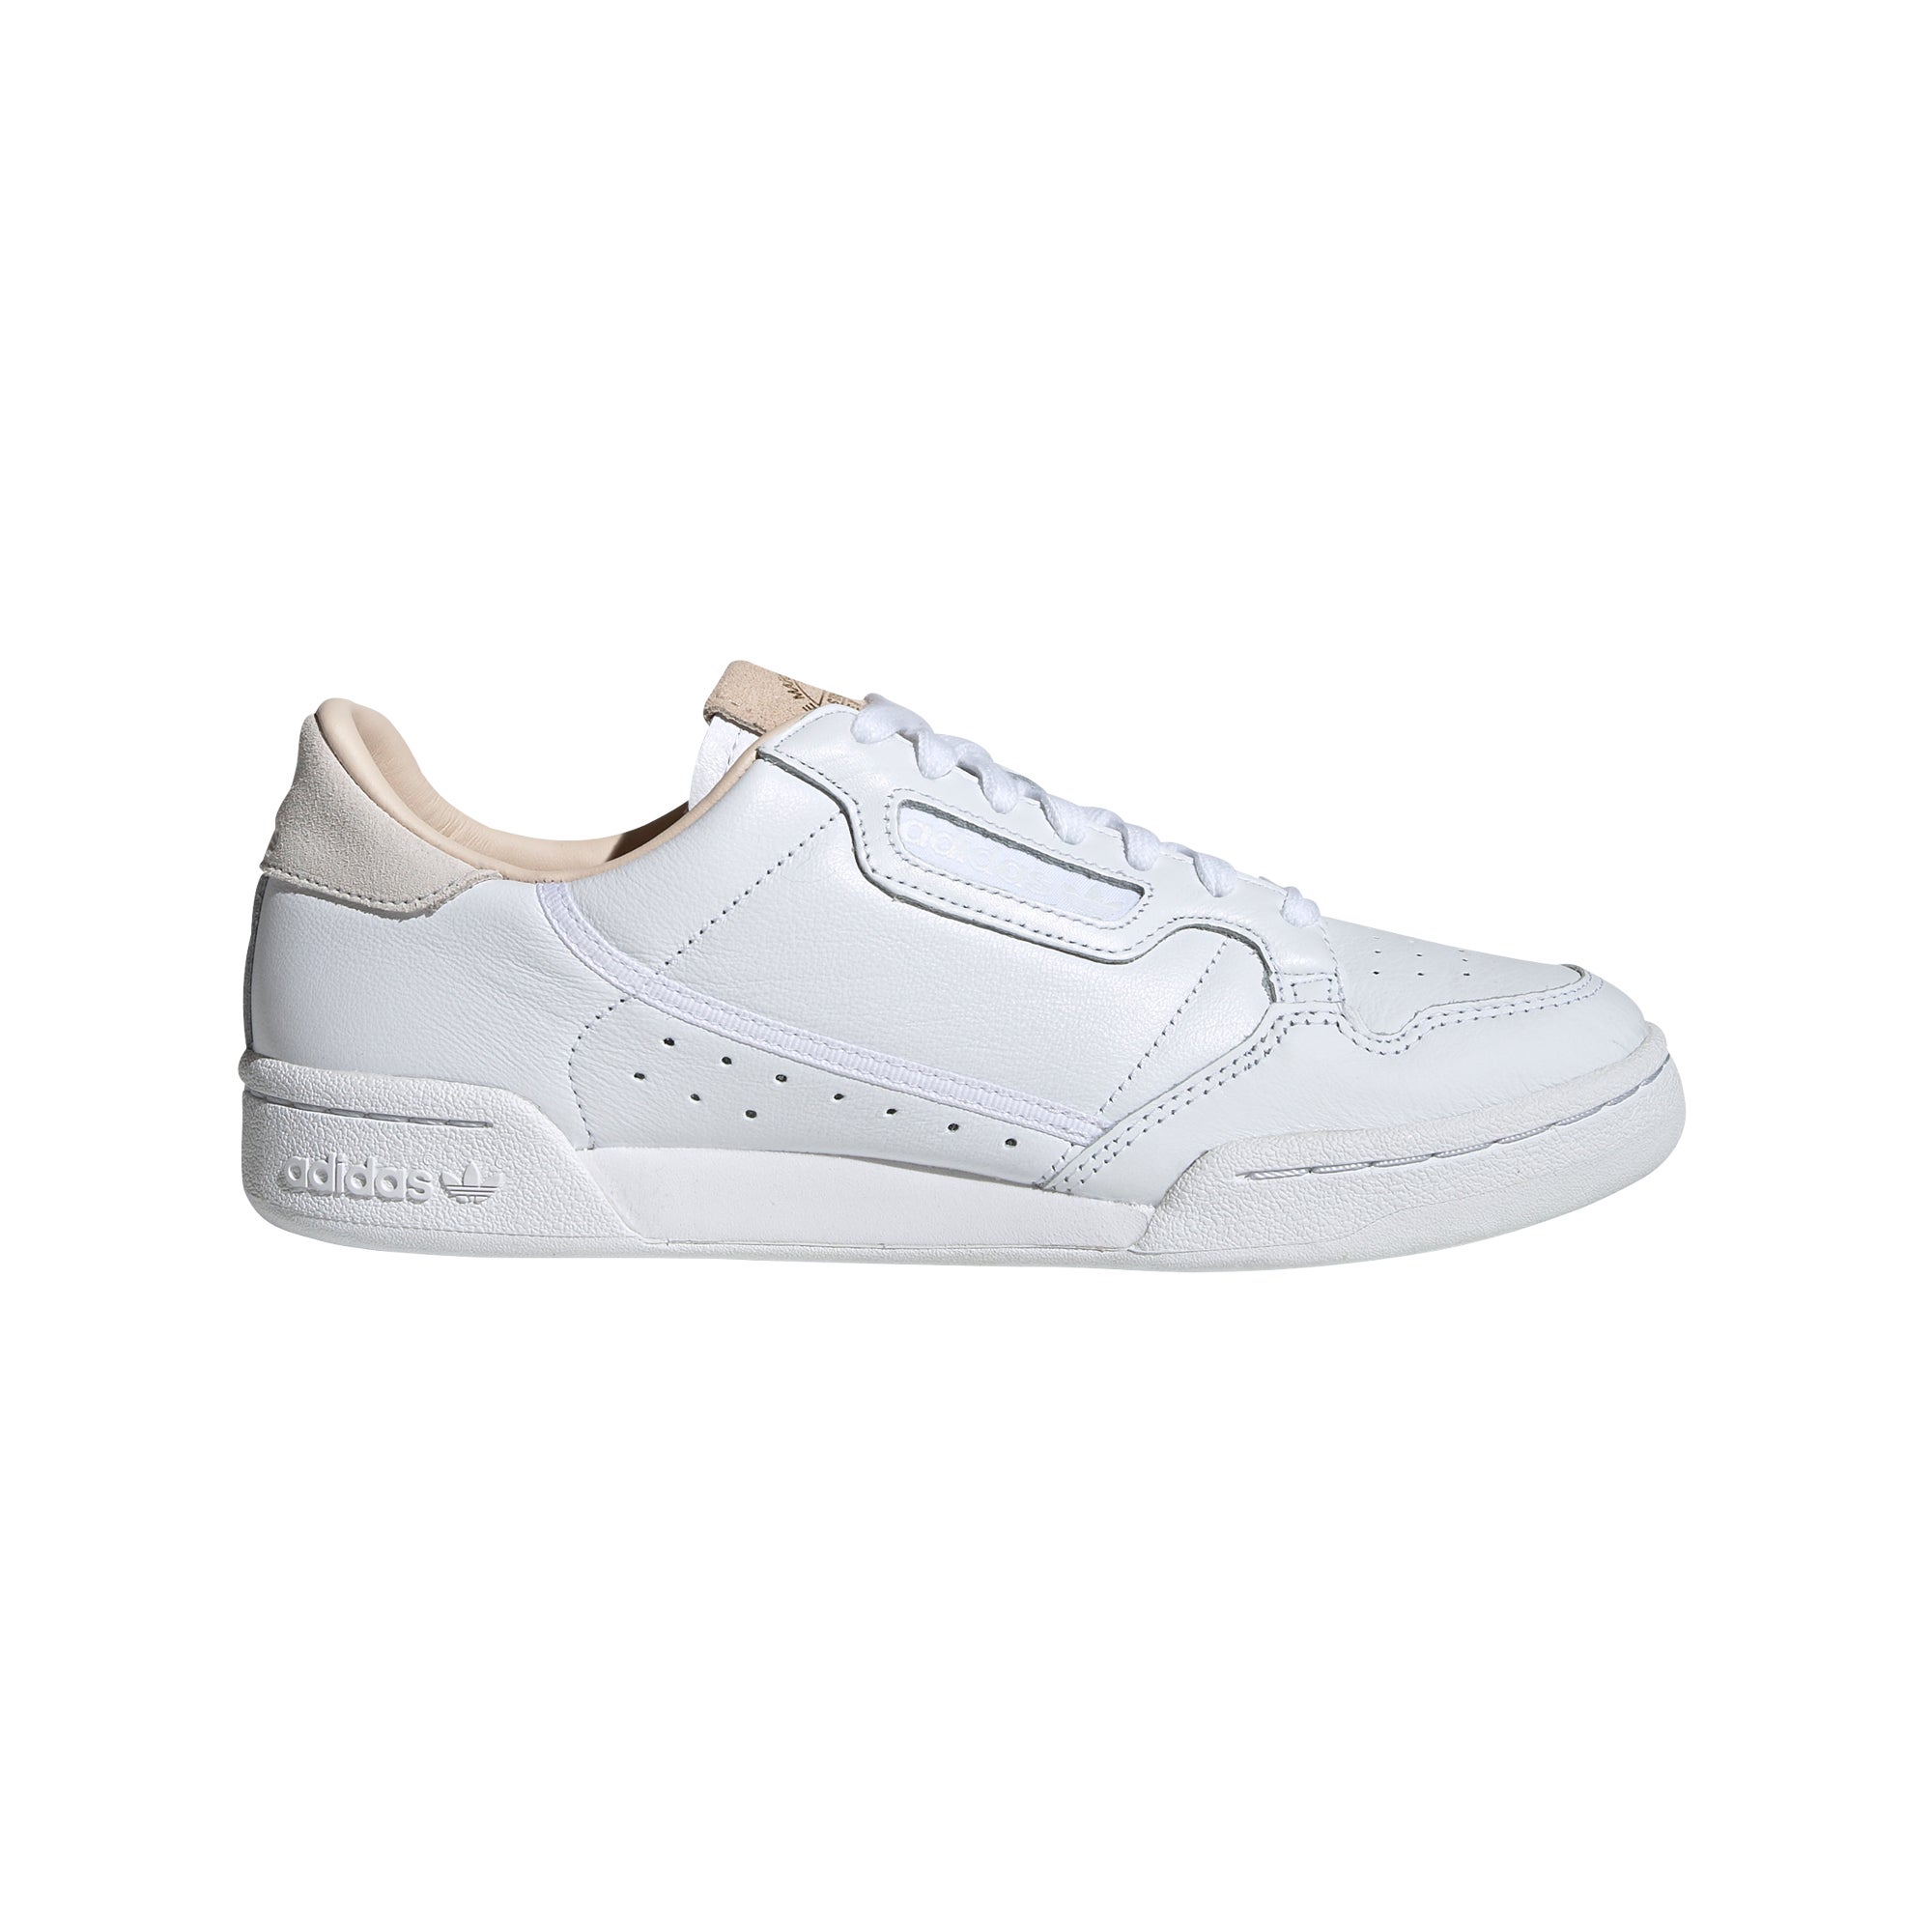 adidas continental 80 homme promo